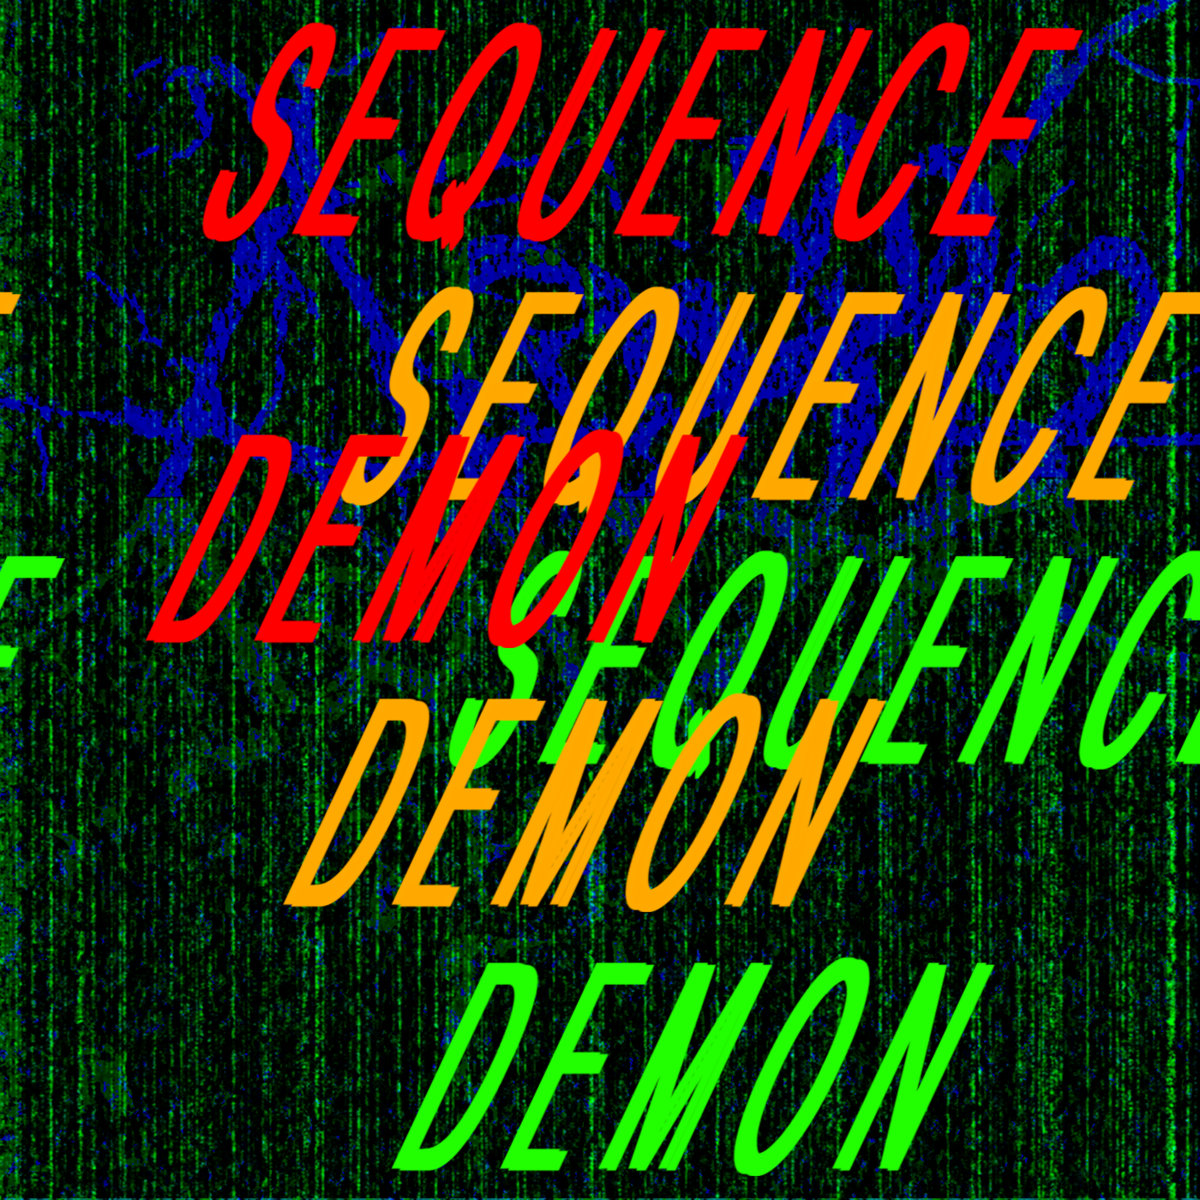 THOTCRIME - sequence_demon cover 